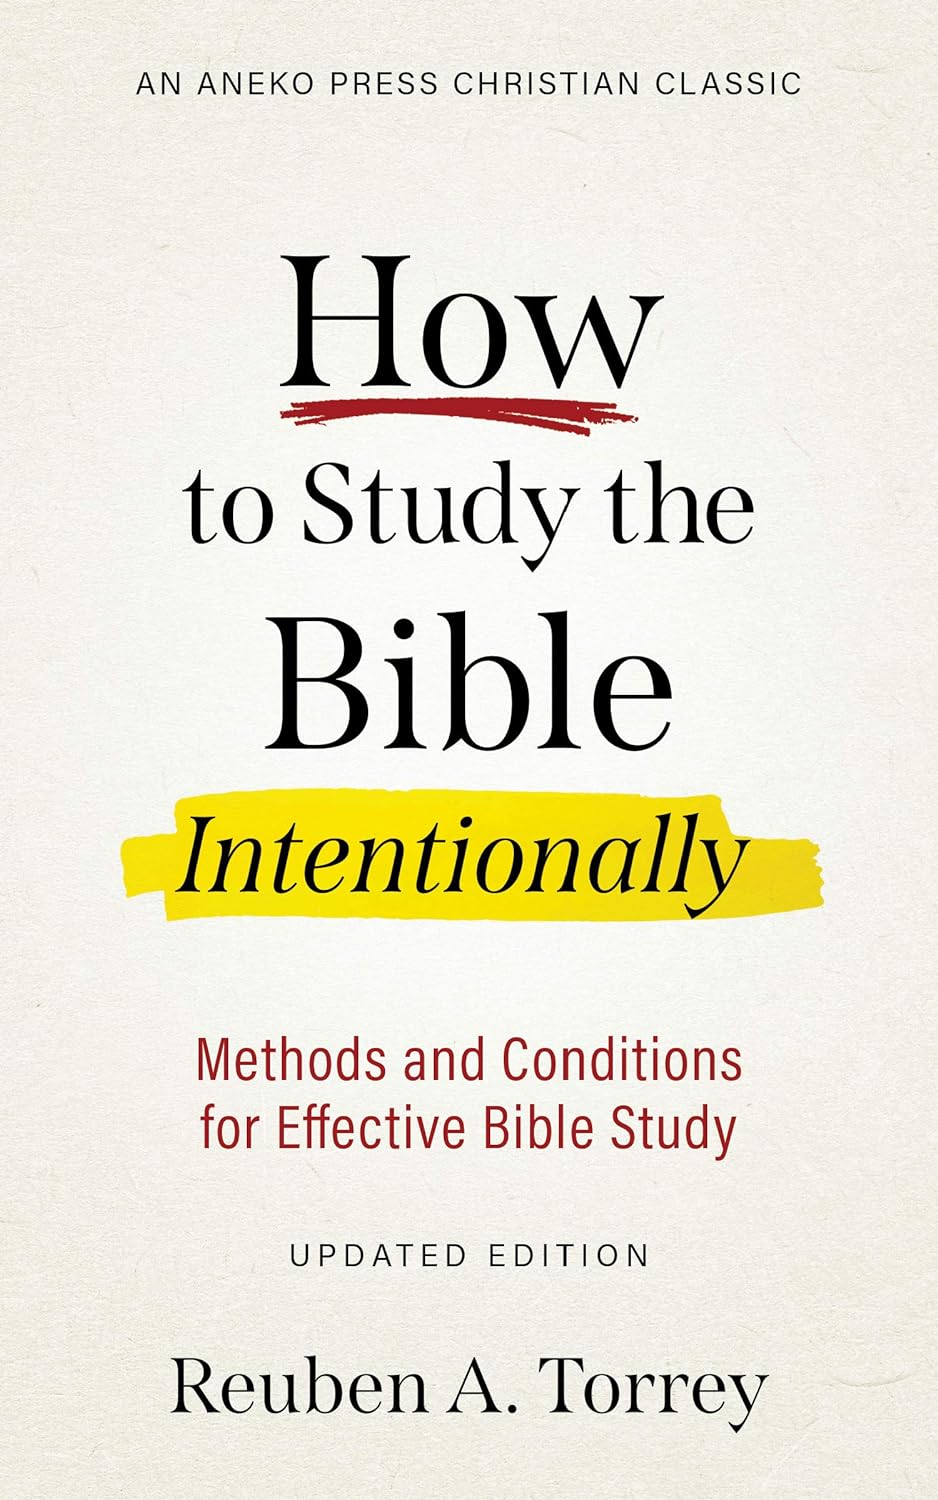 How to Study the Bible Intentionally by R. A. Torrey